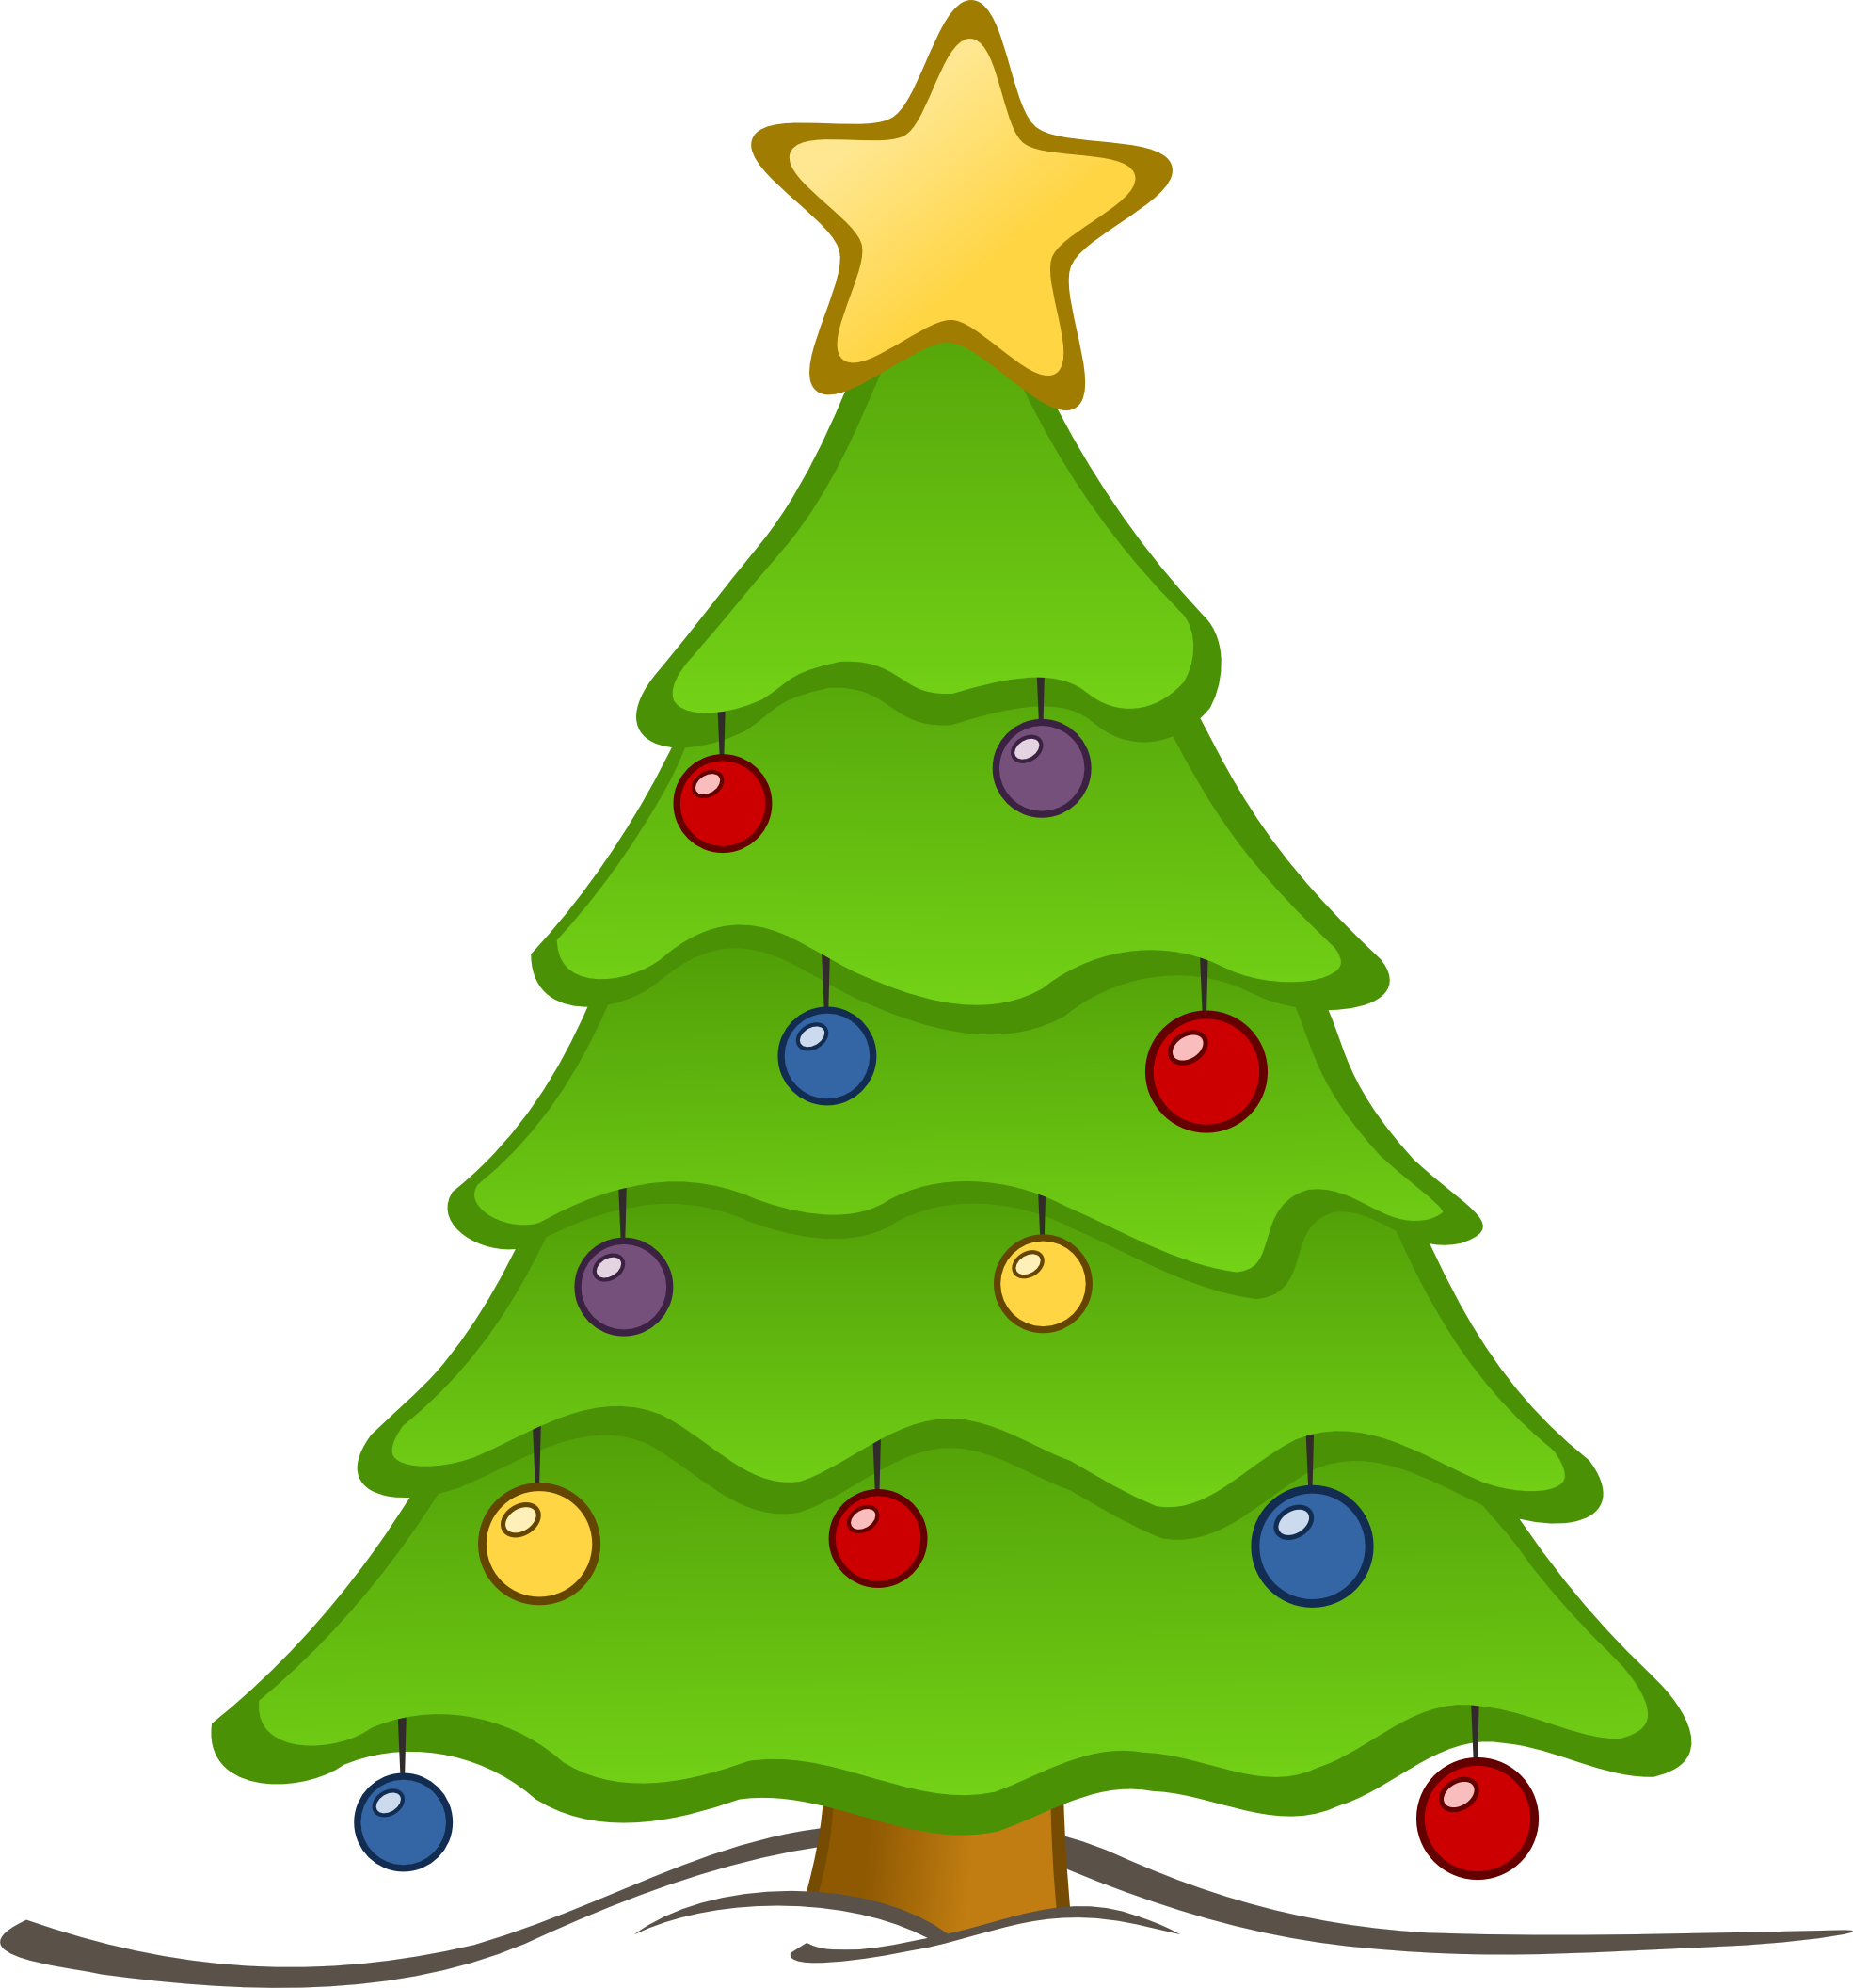 Christmas Tree Pictures Clip Art - ClipArt Best